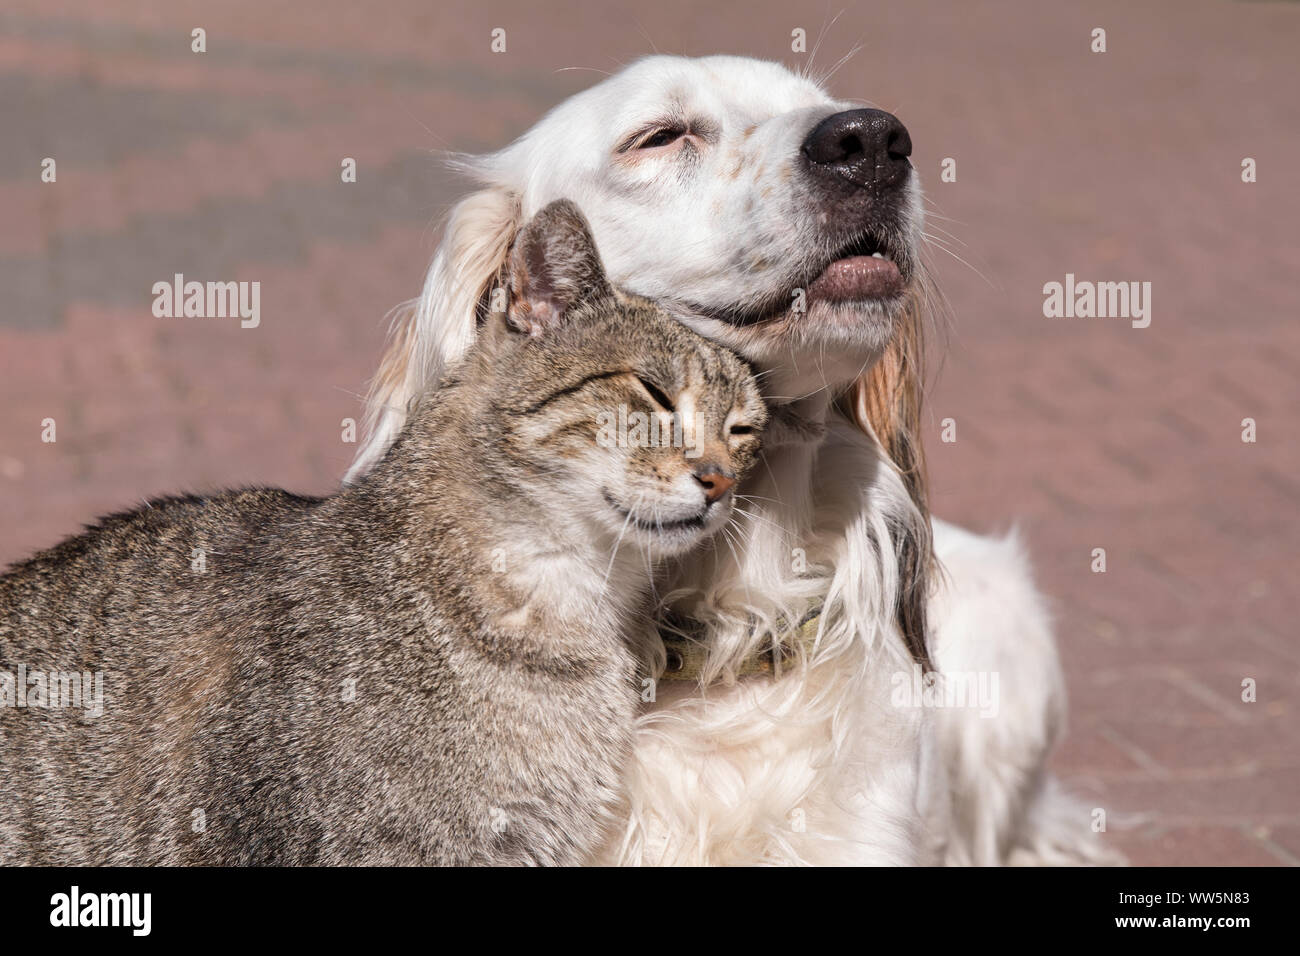 dog and cat playing together Stock Photo